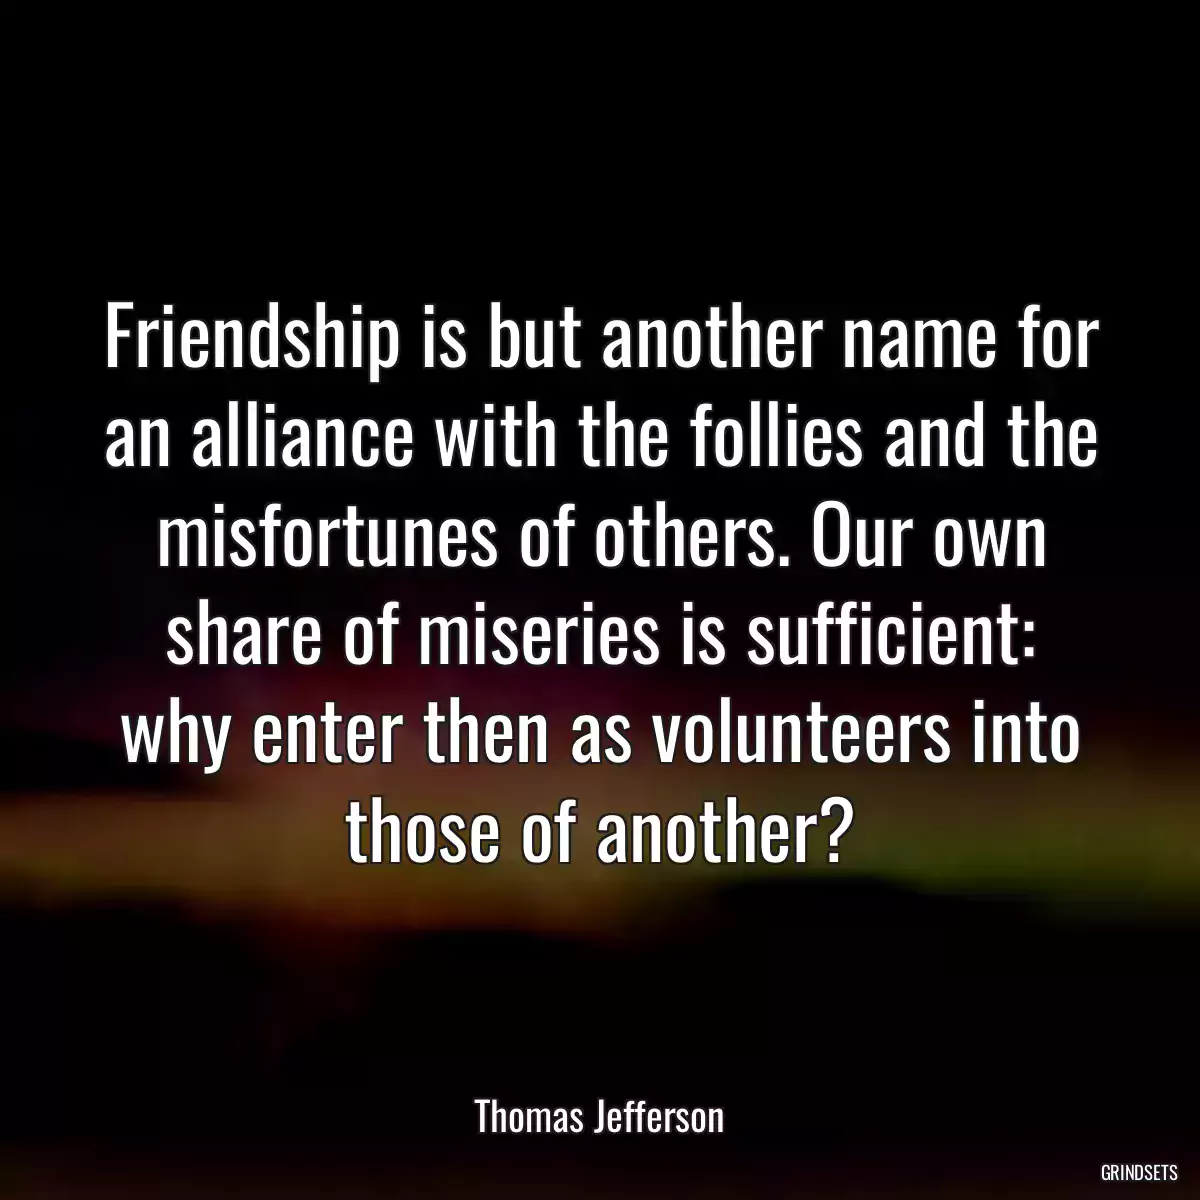 Friendship is but another name for an alliance with the follies and the misfortunes of others. Our own share of miseries is sufficient: why enter then as volunteers into those of another?